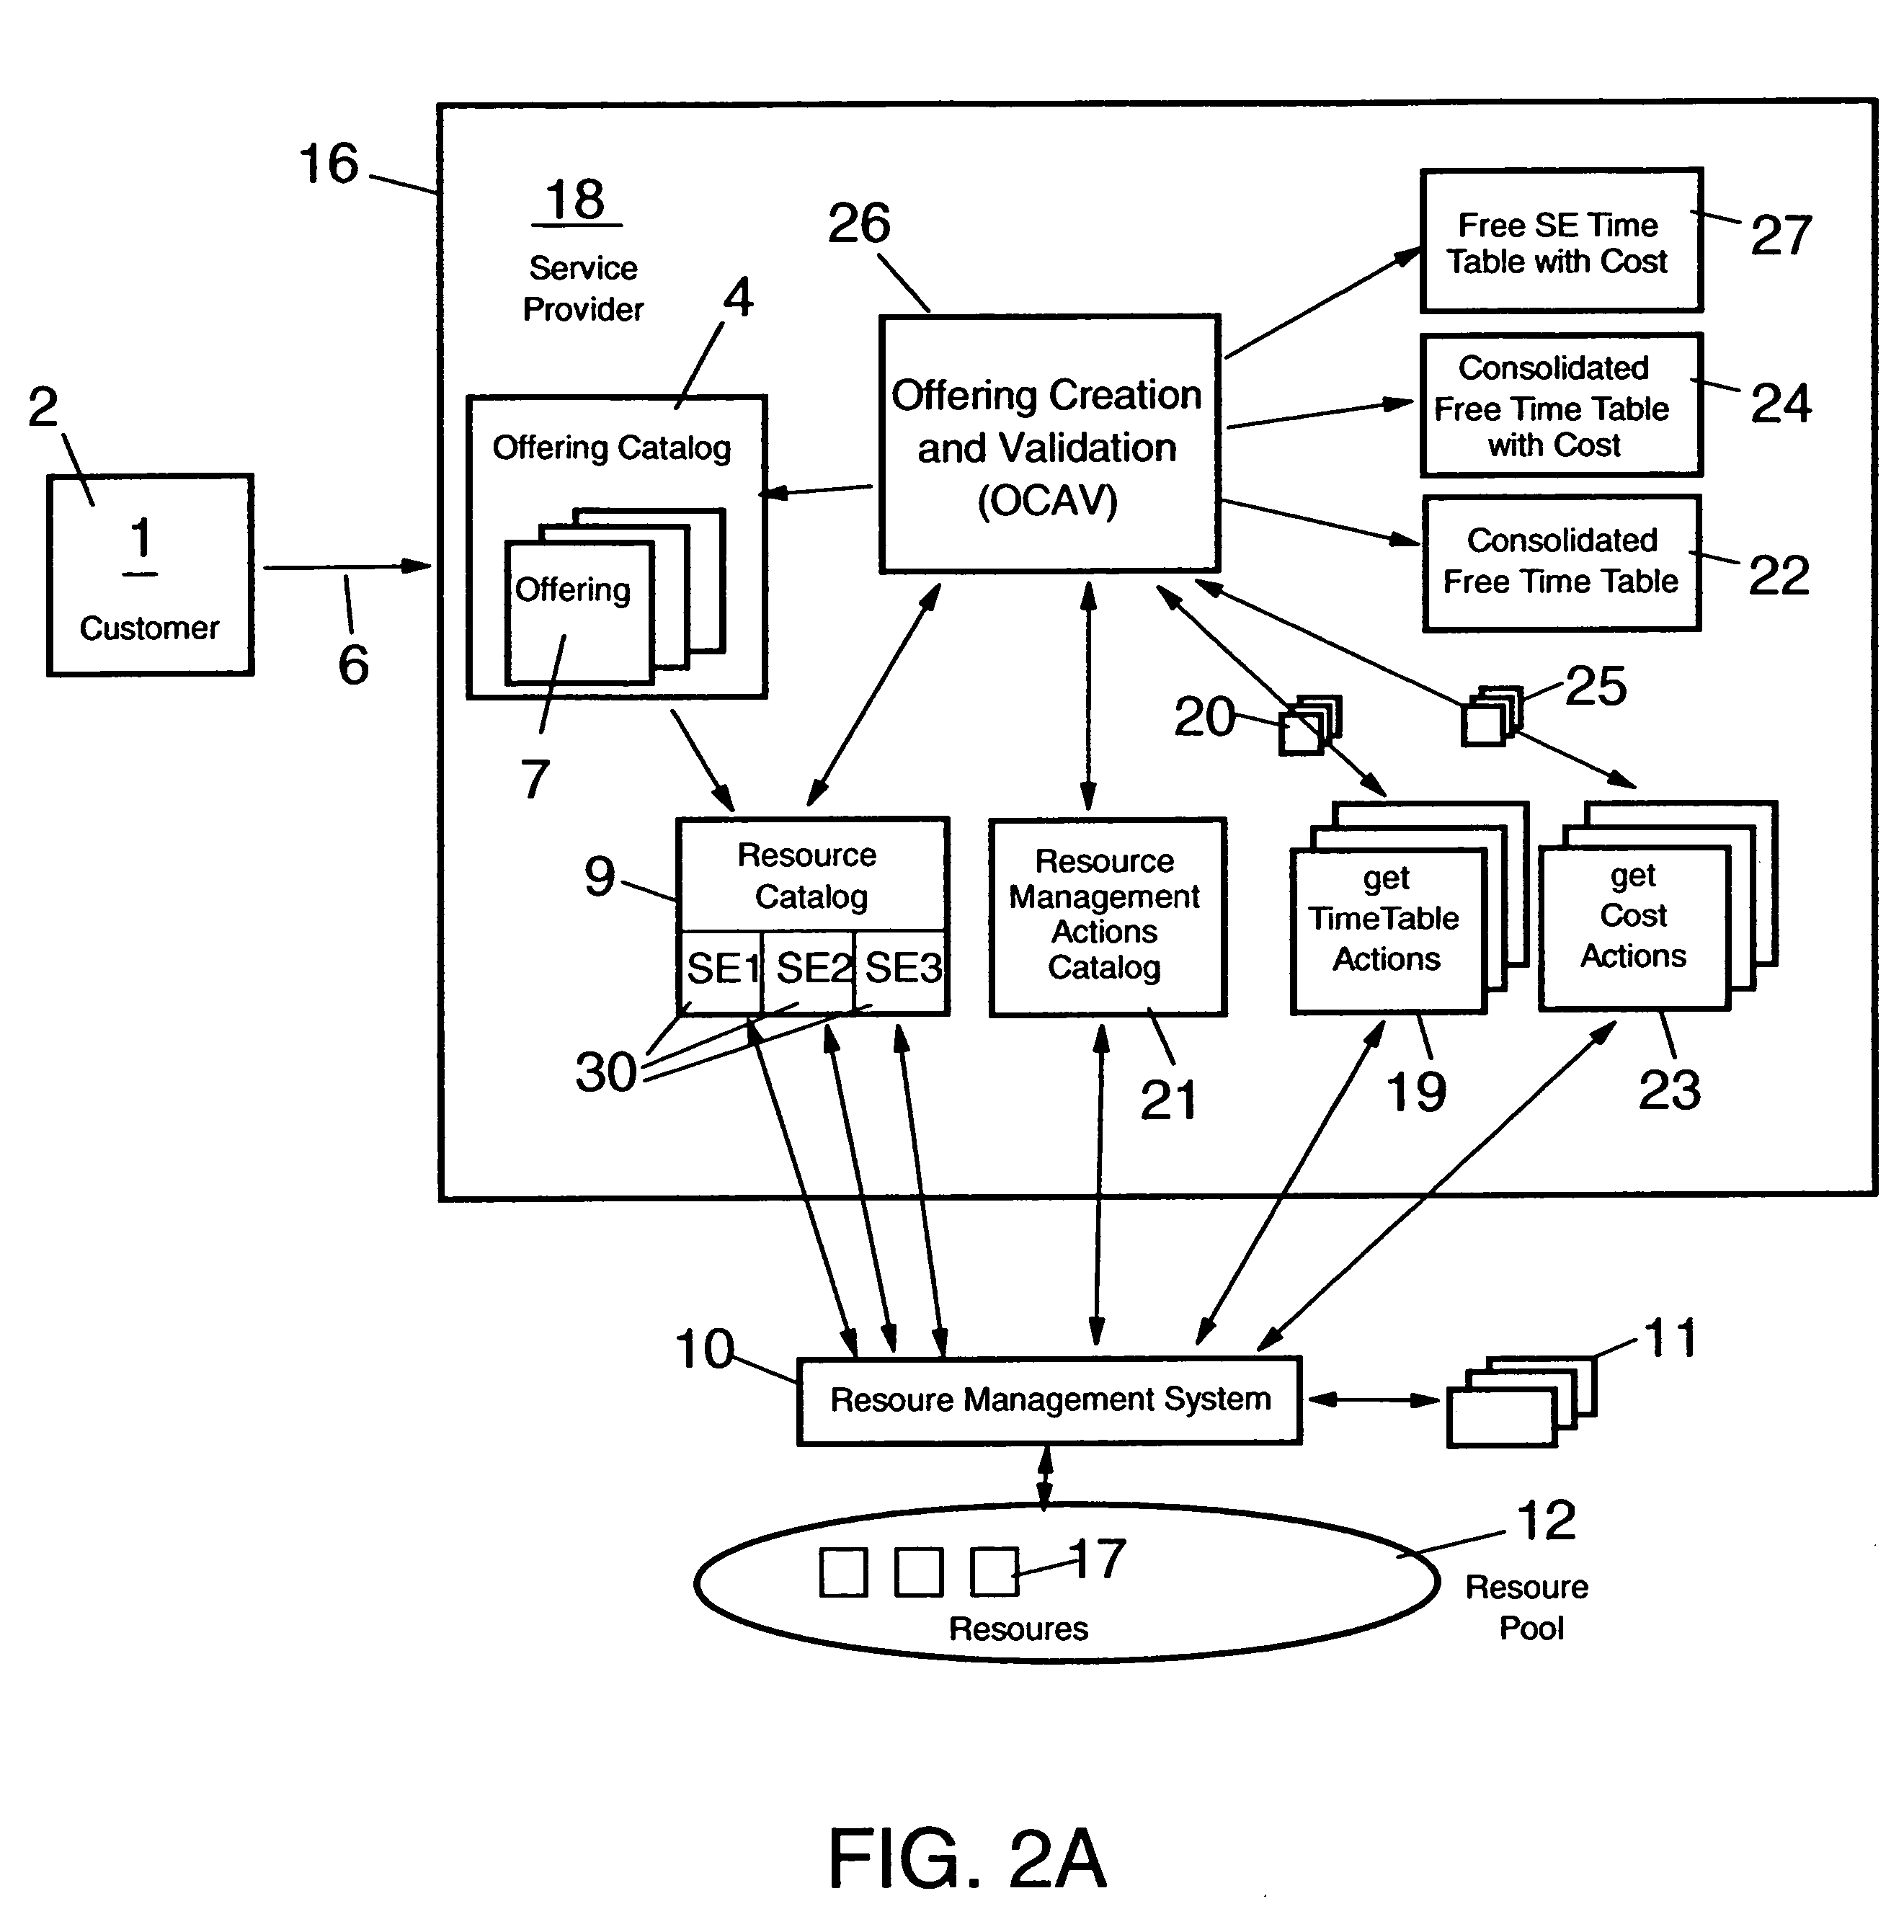 Method for dynamically and automatically setting up offerings for IT services